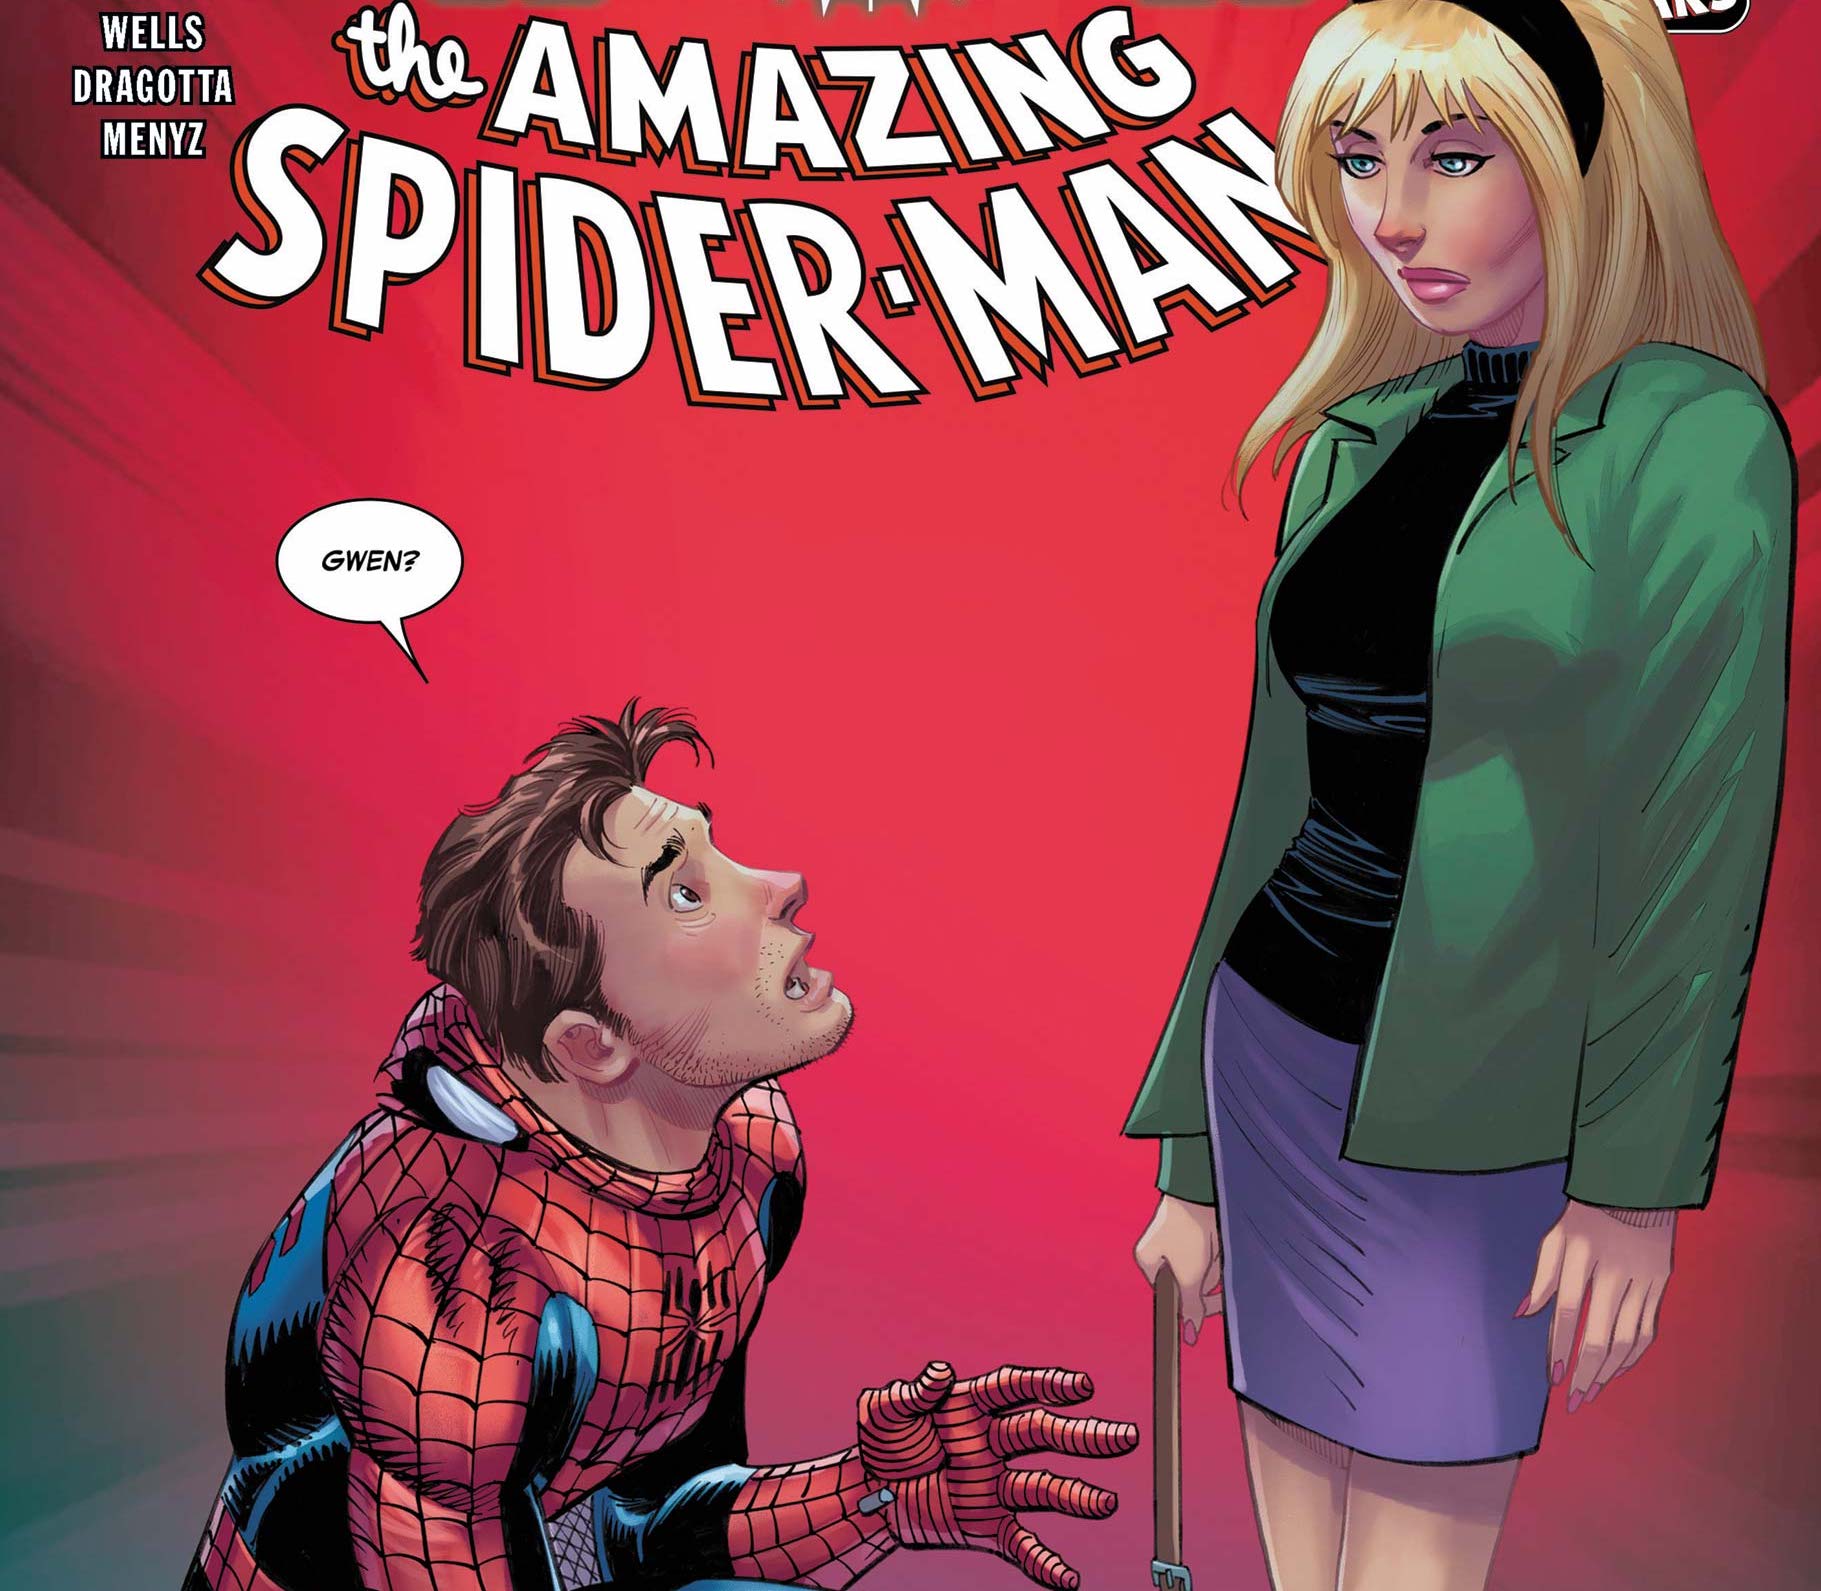 'The Amazing Spider-Man' #10 confirms Peter Parker's love for Gwen Stacy